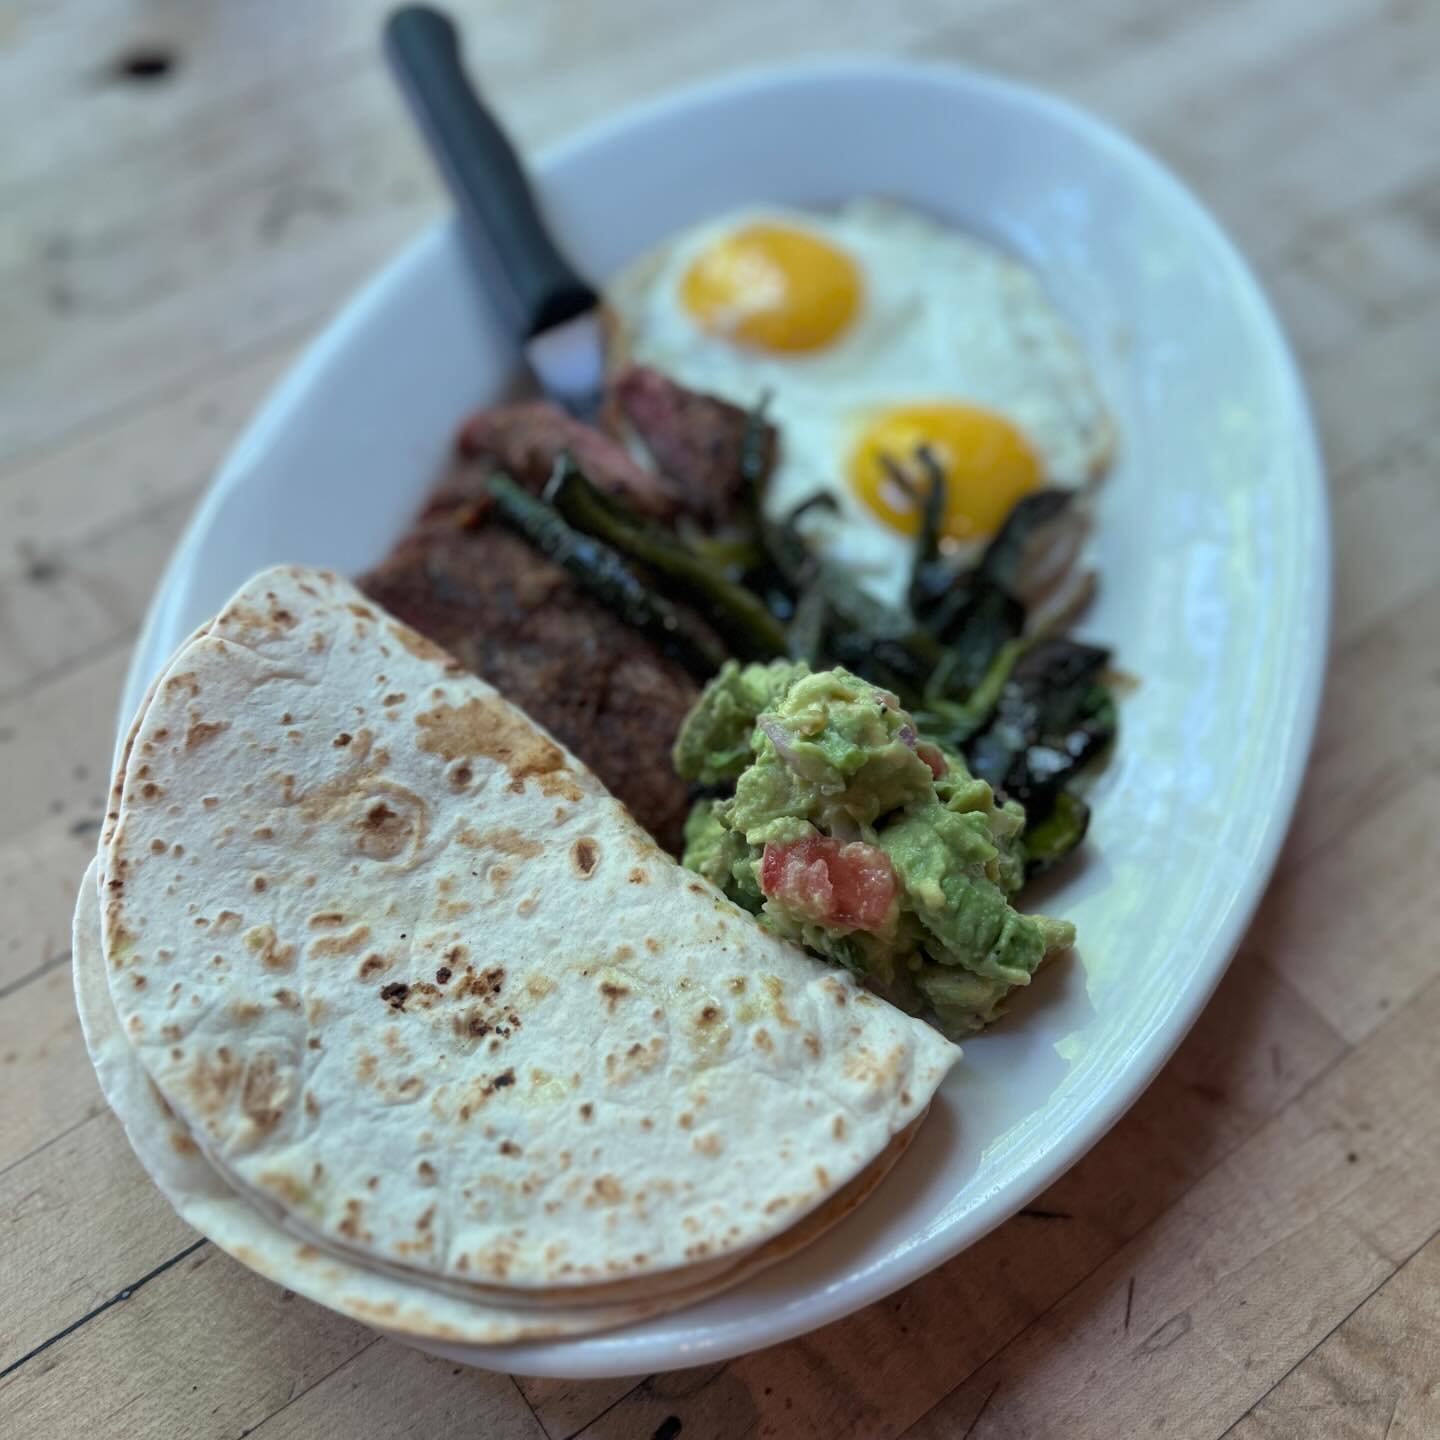 Specials! Carne Asada, chili marinated flank steak, sunny eggs, guacamole, grilled spring onions and poblanos, flour tortillas. Tres Leches Pancakes, three milk rum custard, strawberries, whipped cream. 
#westeggcafe but call us #westegg #brunch #bru